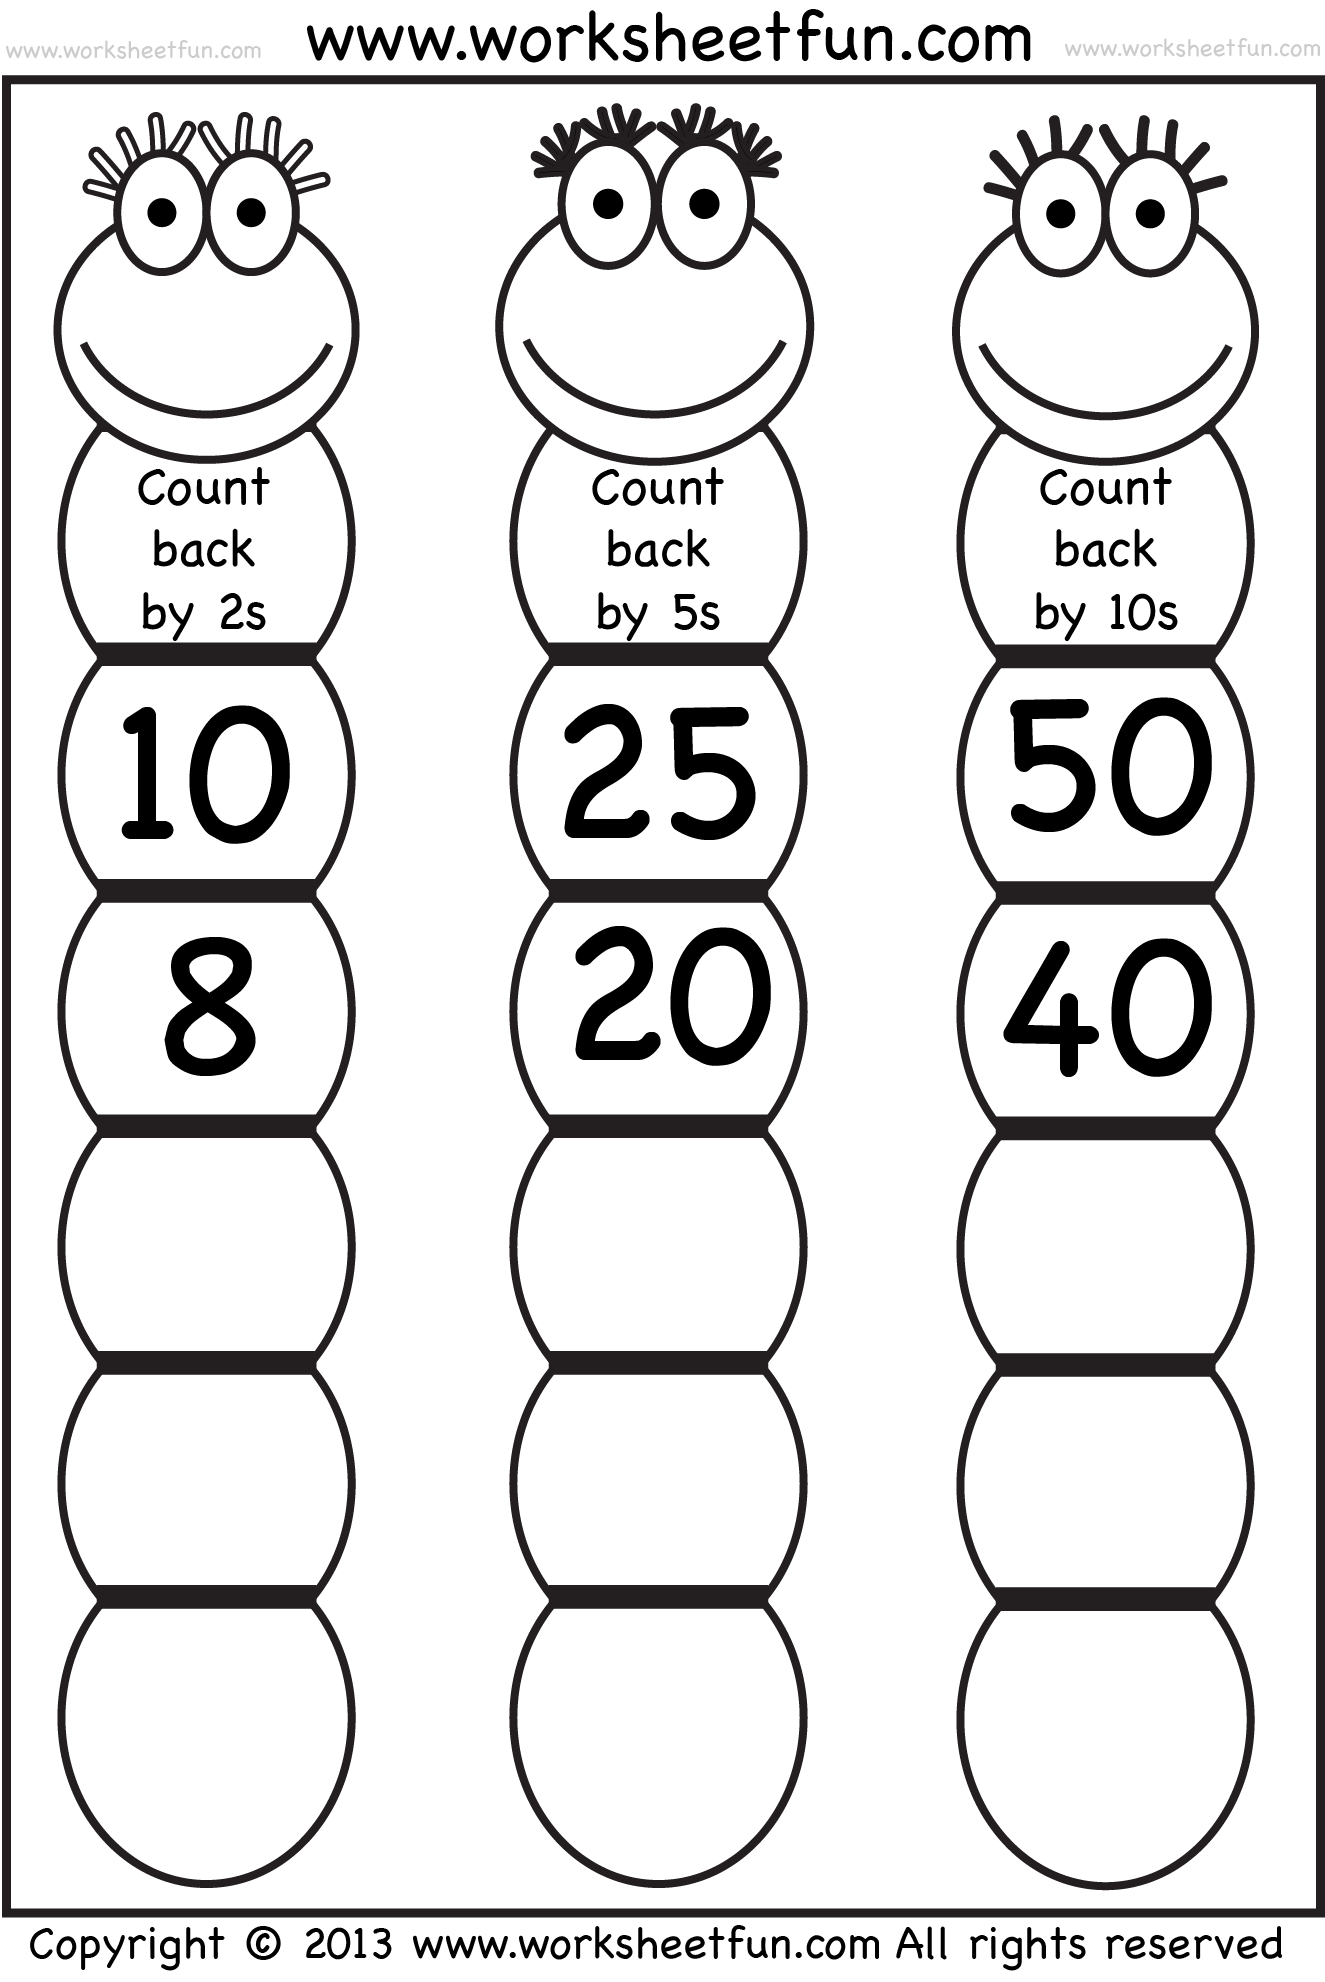 Skip Counting – Count Back by 22, 22 and 22 – Worksheet / FREE With Counting By 5s Worksheet